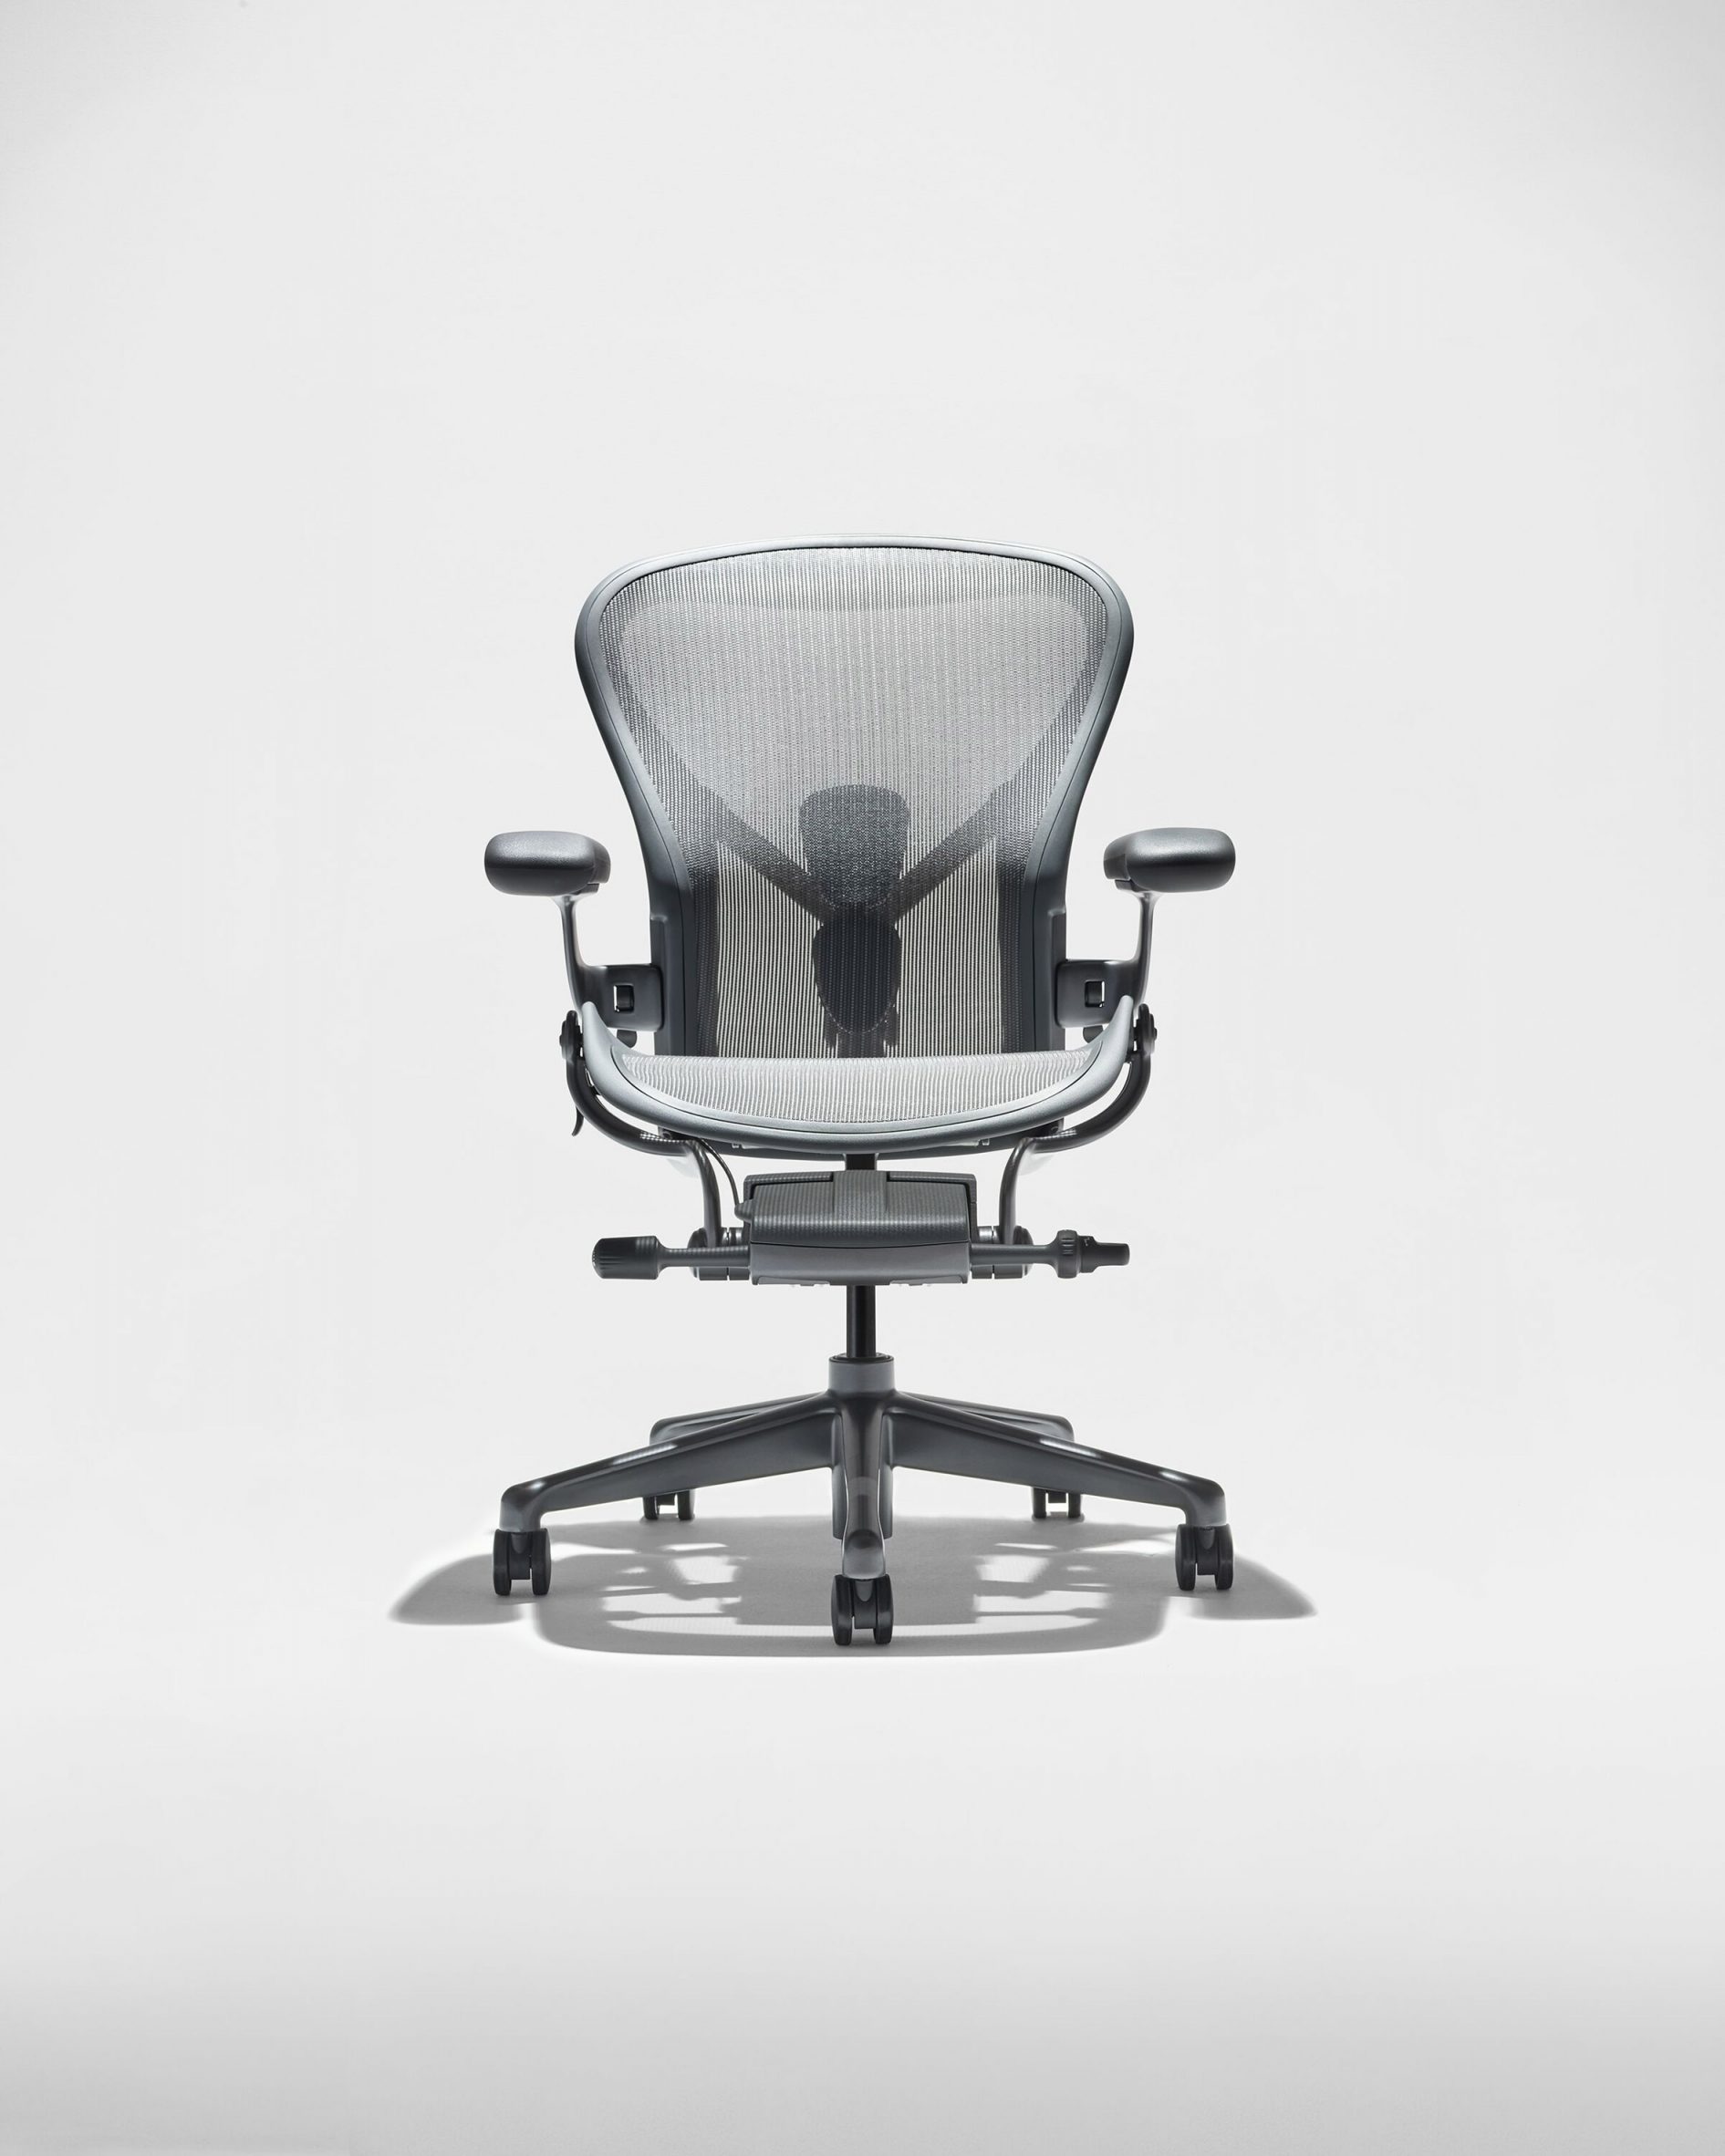 The Aeron Chair in black and grey